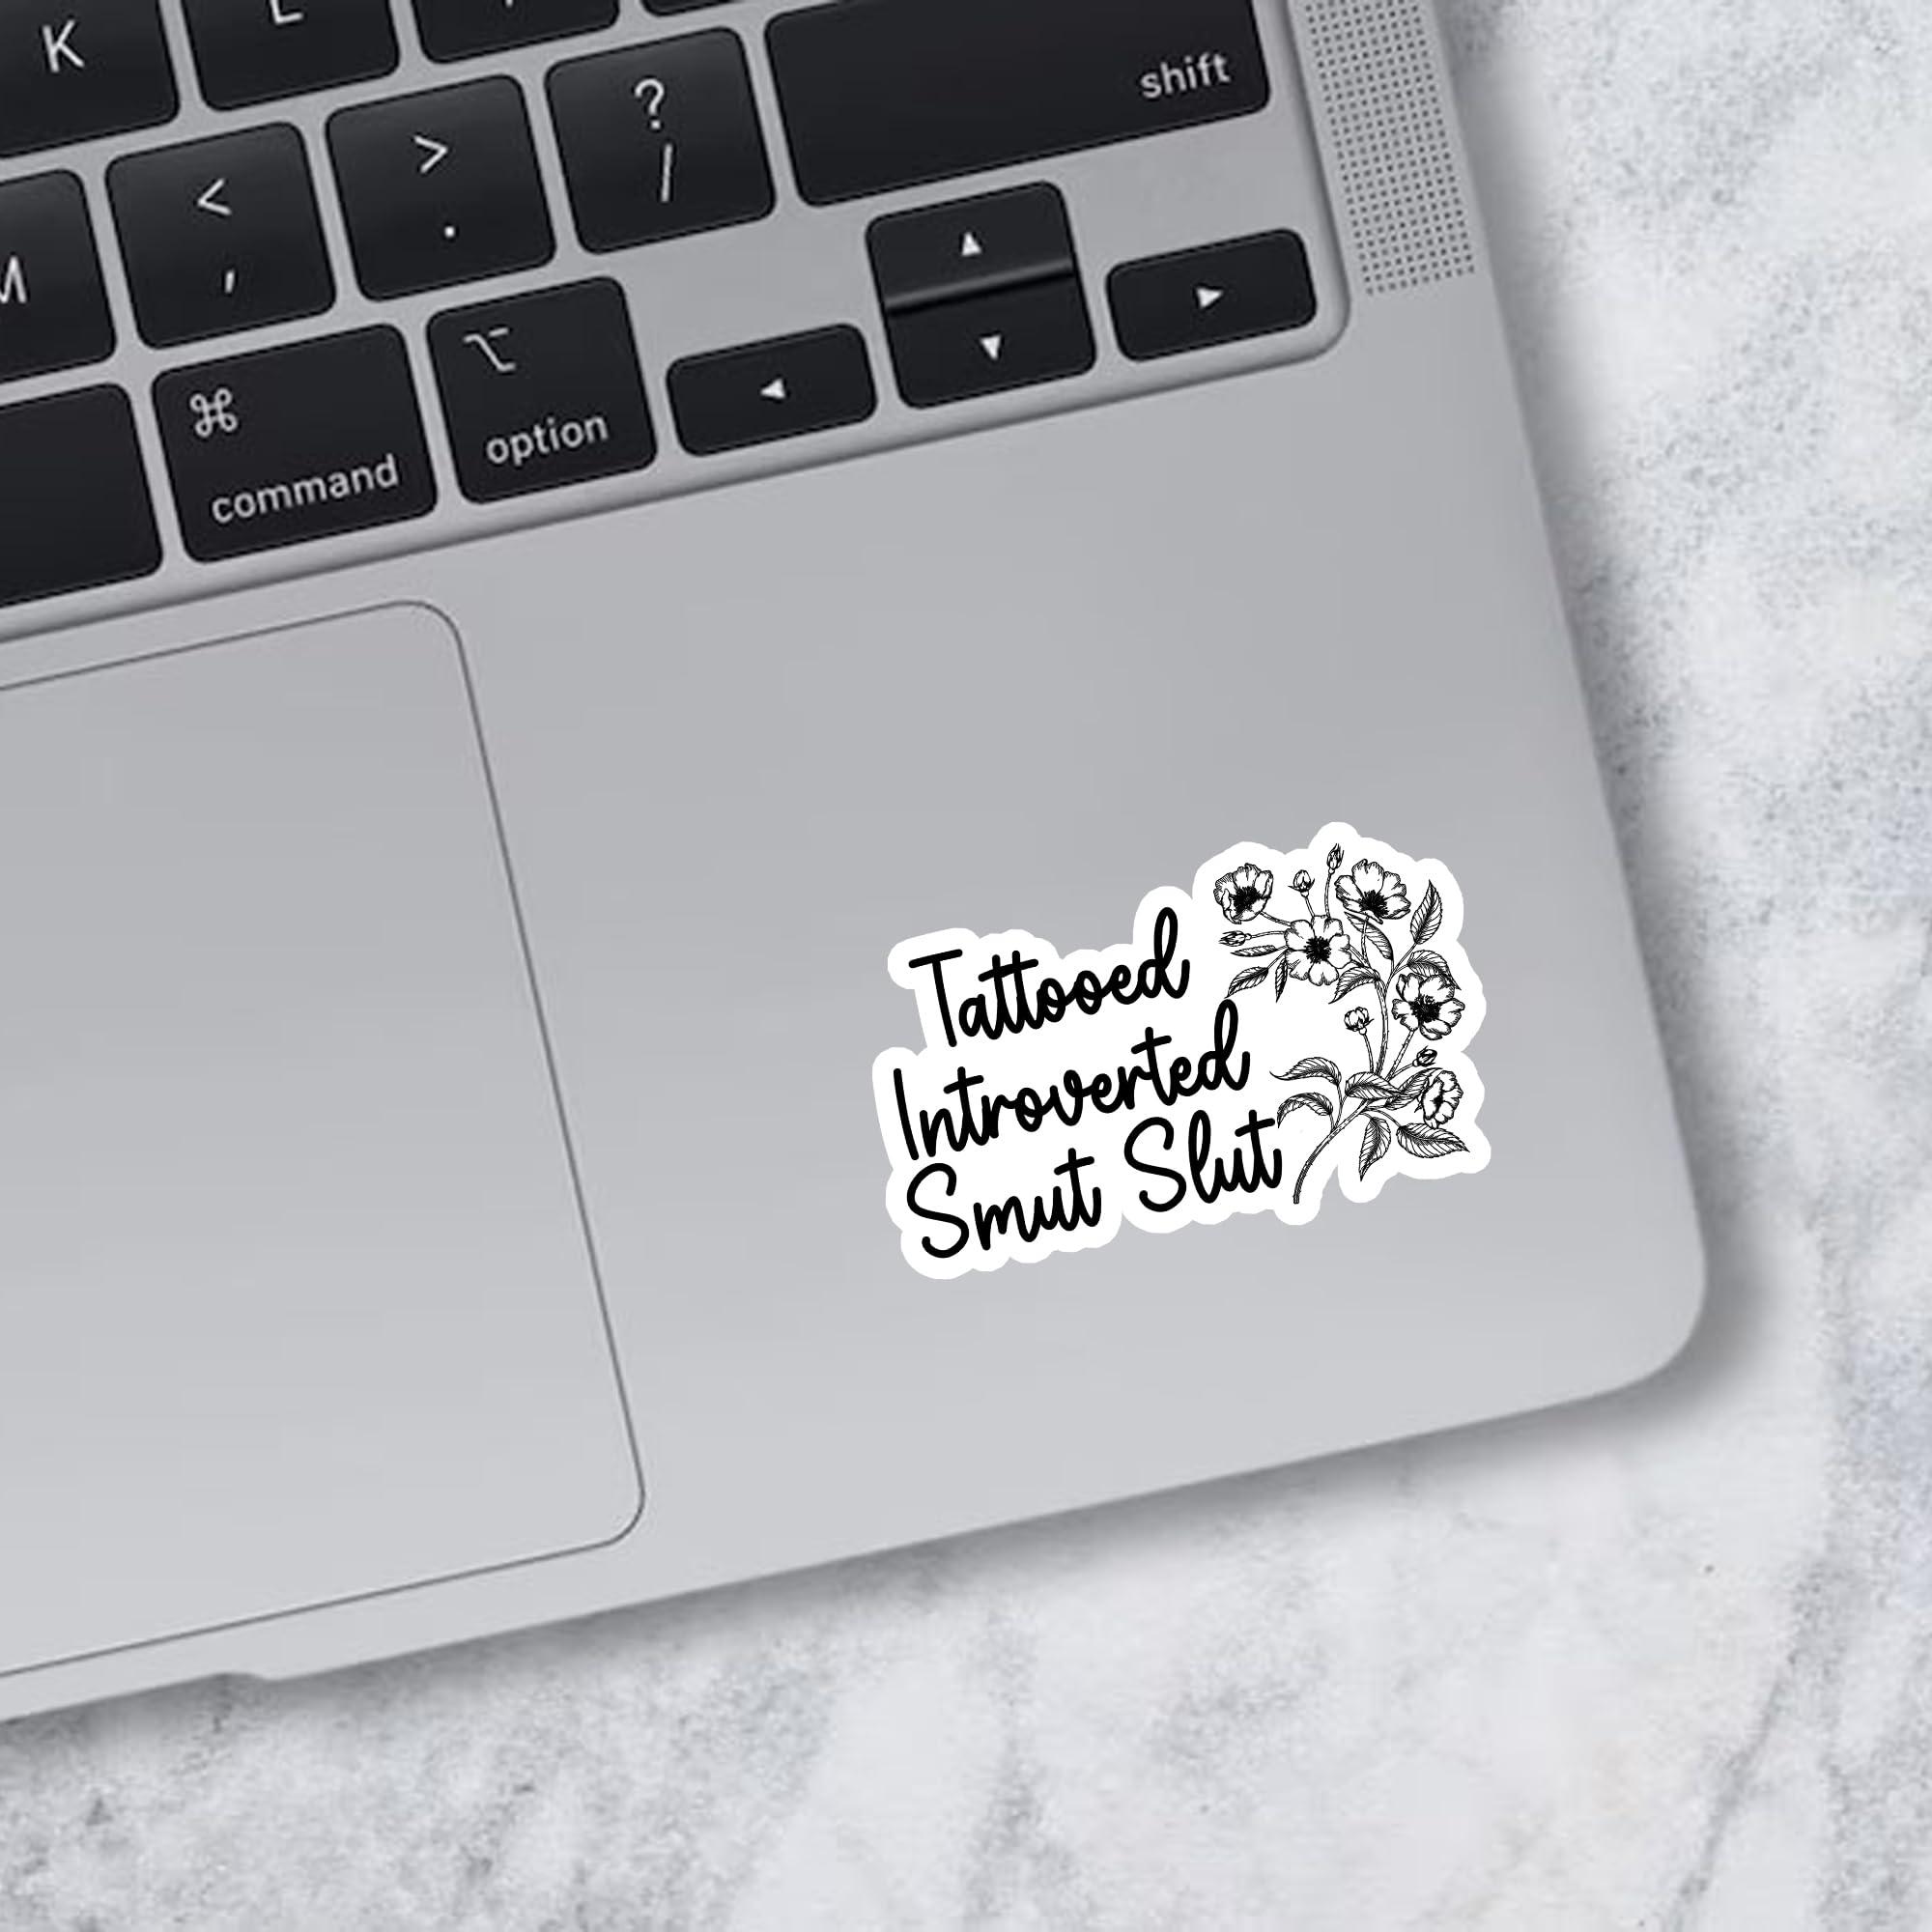 Tattooed Introverted Smut Slut Sticker, Floral Stickers, Bookish Stickers, Smut Reader Stickers, Water Assistant Die-Cut Vinyl Decals for Laptop, Phone, Guitar, Water Bottles, Kindle Stickers